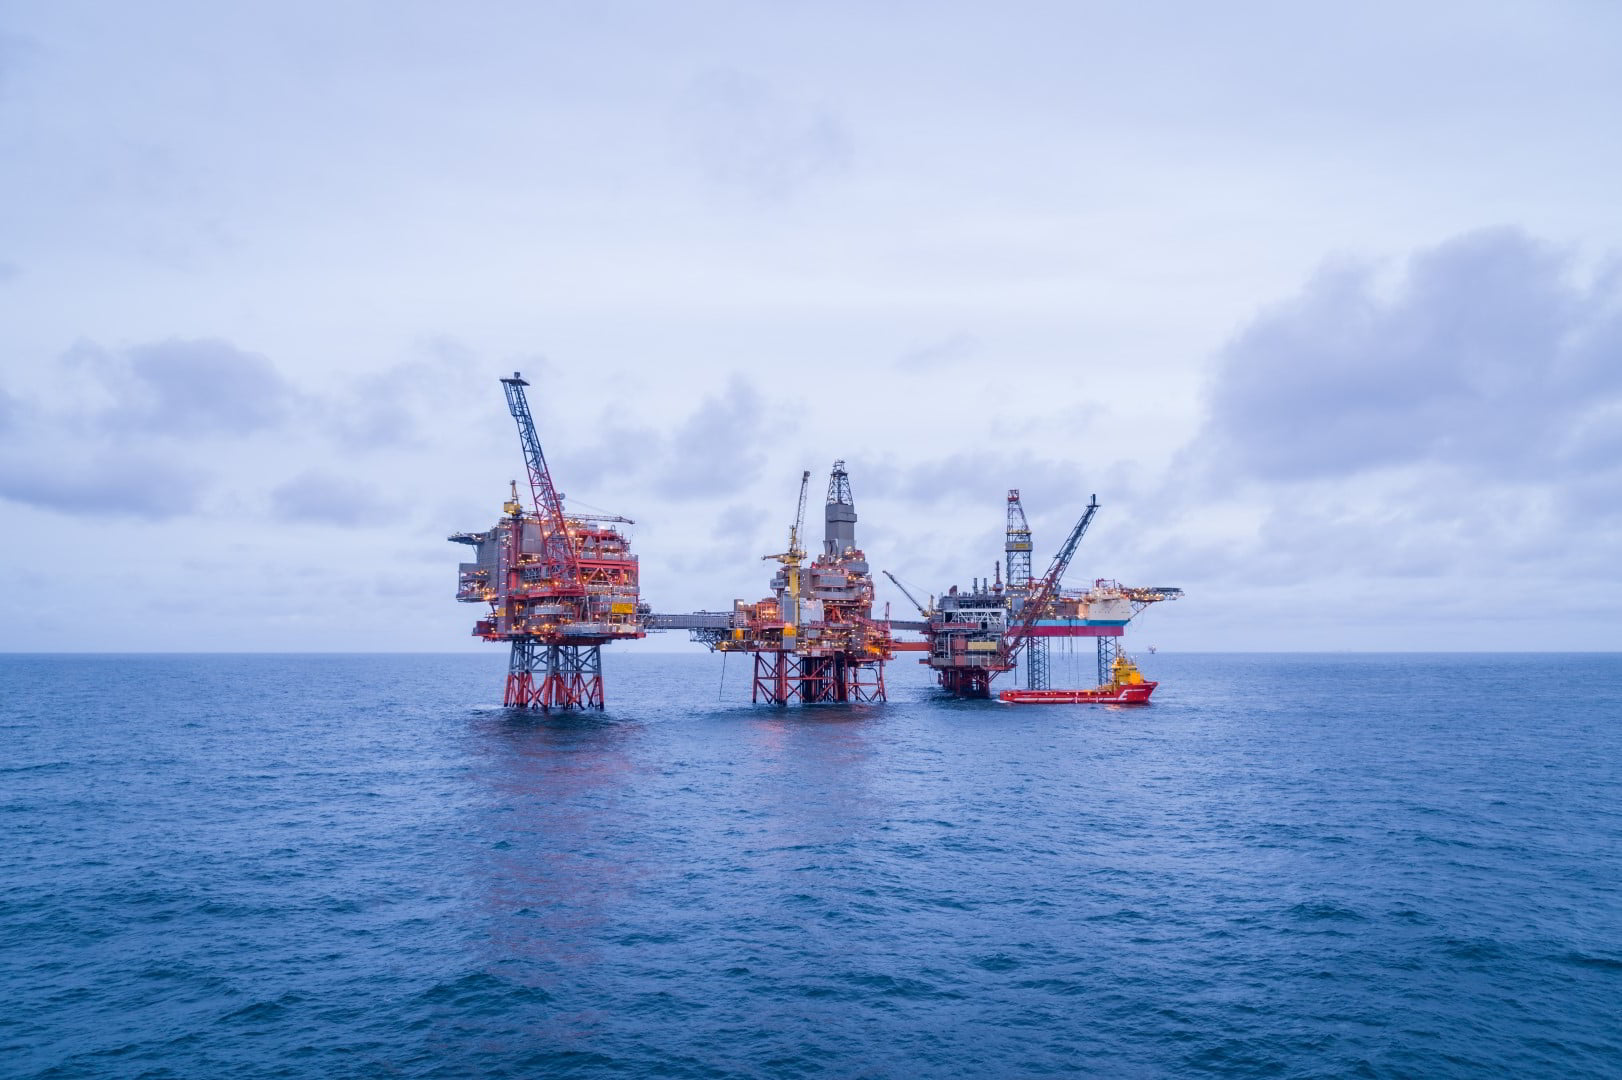 Aker BP - Lundin merger to come into force today